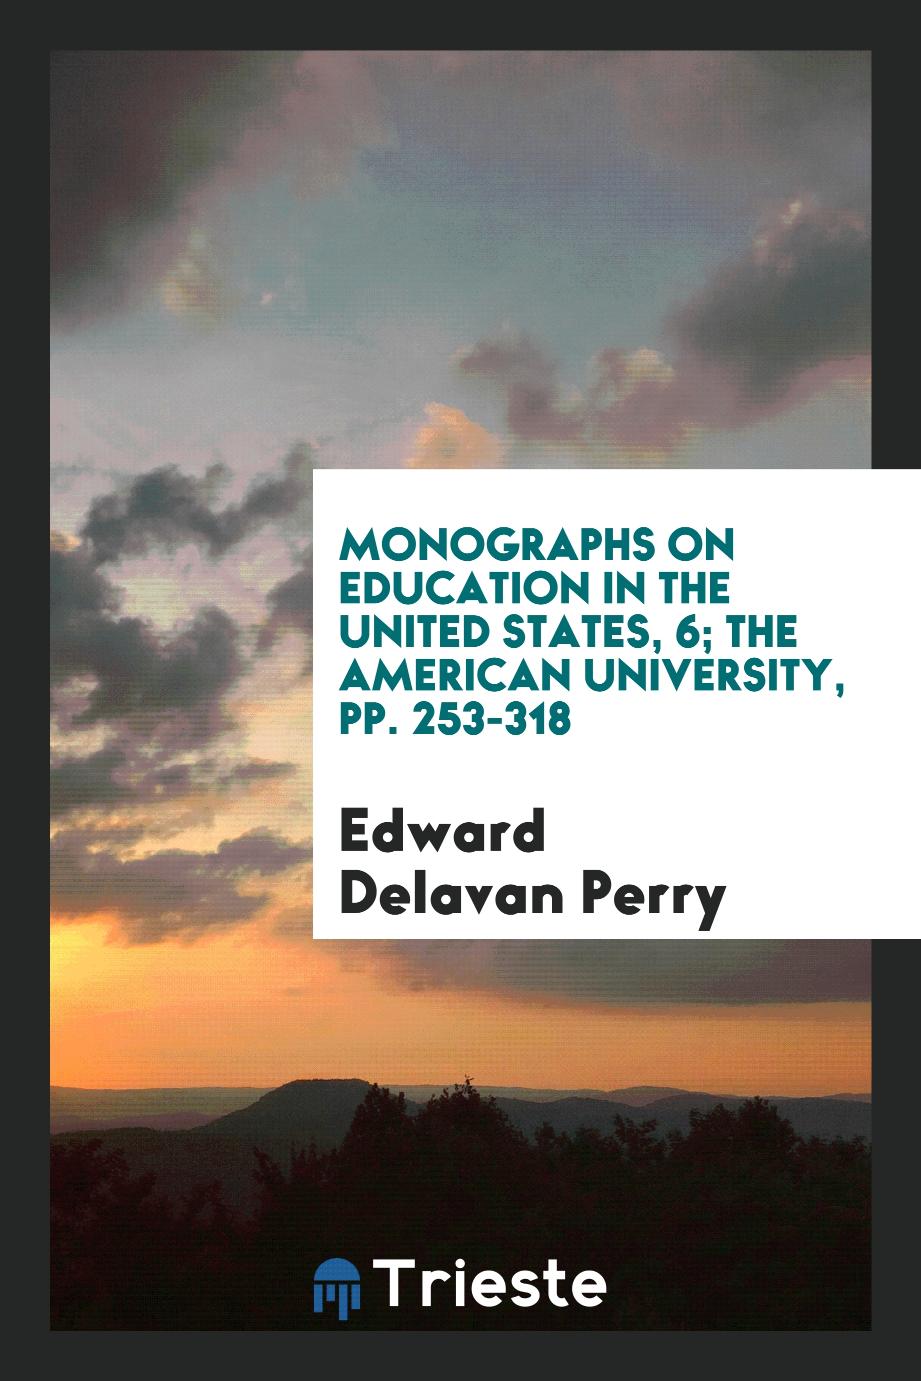 Edward Delavan Perry - Monographs on Education in the United States, 6; The American University, pp. 253-318